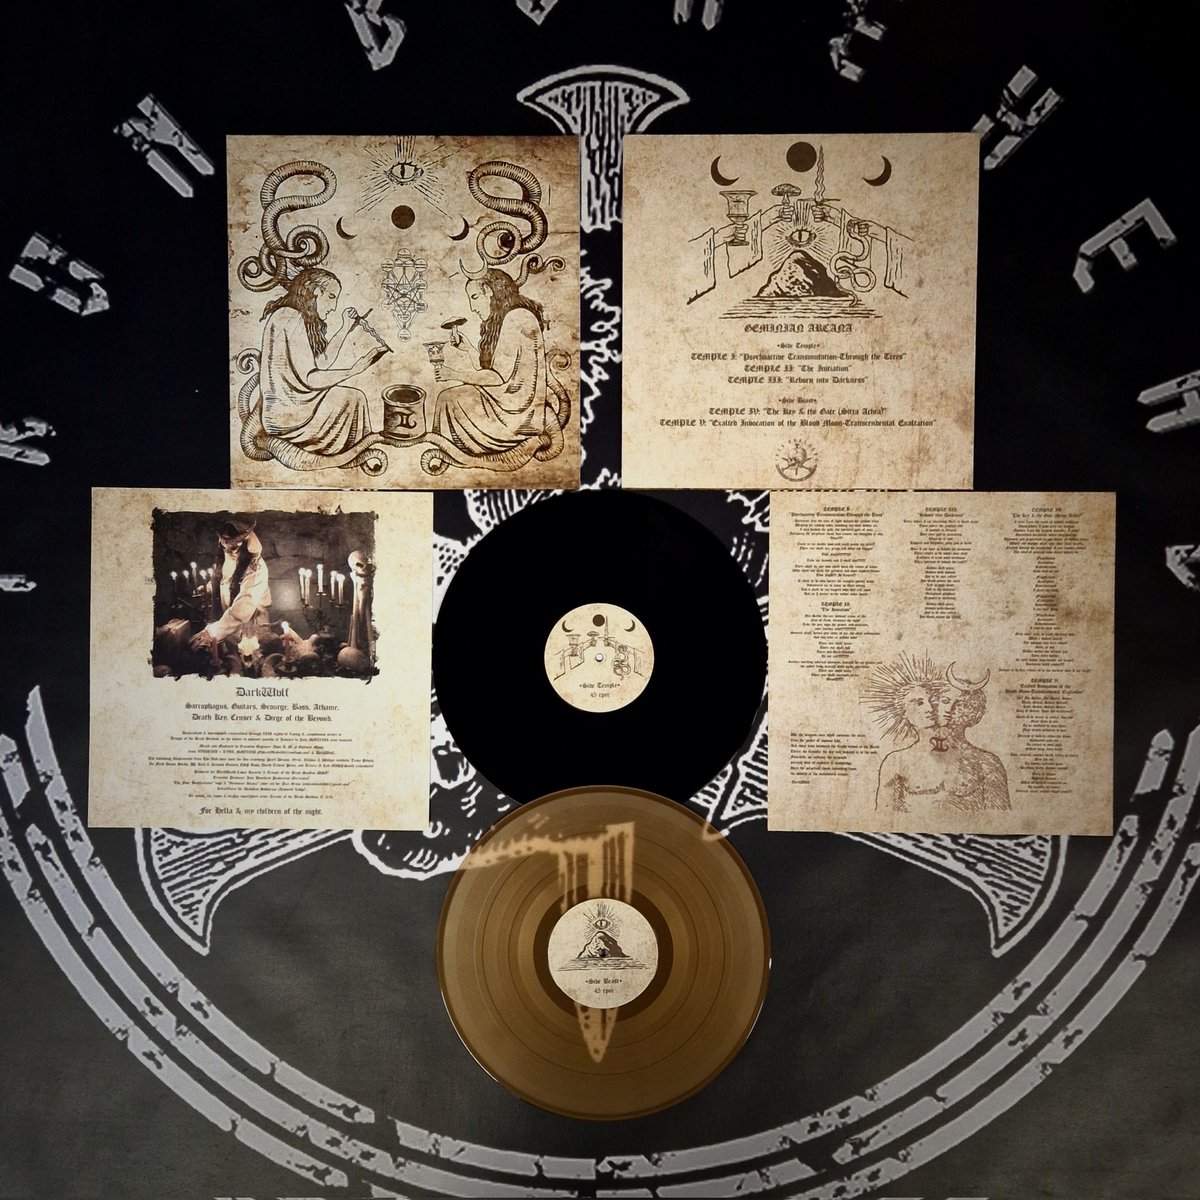 OUT NOW! TEMPLE OF THE BEAST (U.S.A.) 'Geminian Arcana' 12'MLP - 350gsm Jacket with matt varnish - 140g Black or Sand Color Vinyl - 250gsm Art Paper Insert - Limited to 300 copies (200x Black & 100x Sand Vinyl) Sound: ironboneheadproductions.bandcamp.com/album/temple-o… Order: shop.ironbonehead.de